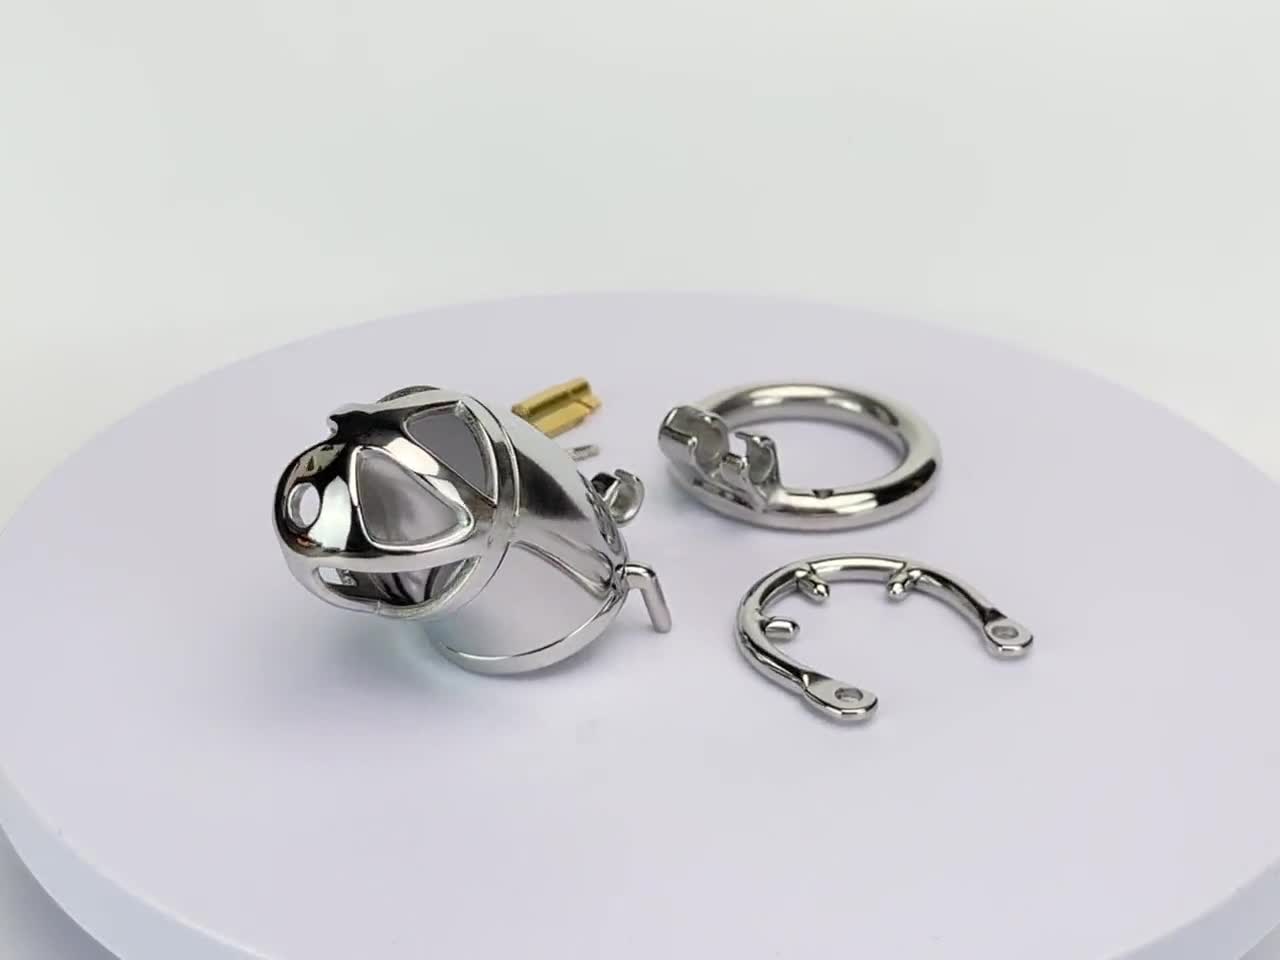 Erotic Urethral Male Belt Stainless Steel Metal Underwear Lock Cock Cage  Chastity Device SM Sex Toys For Men 80% Online Store